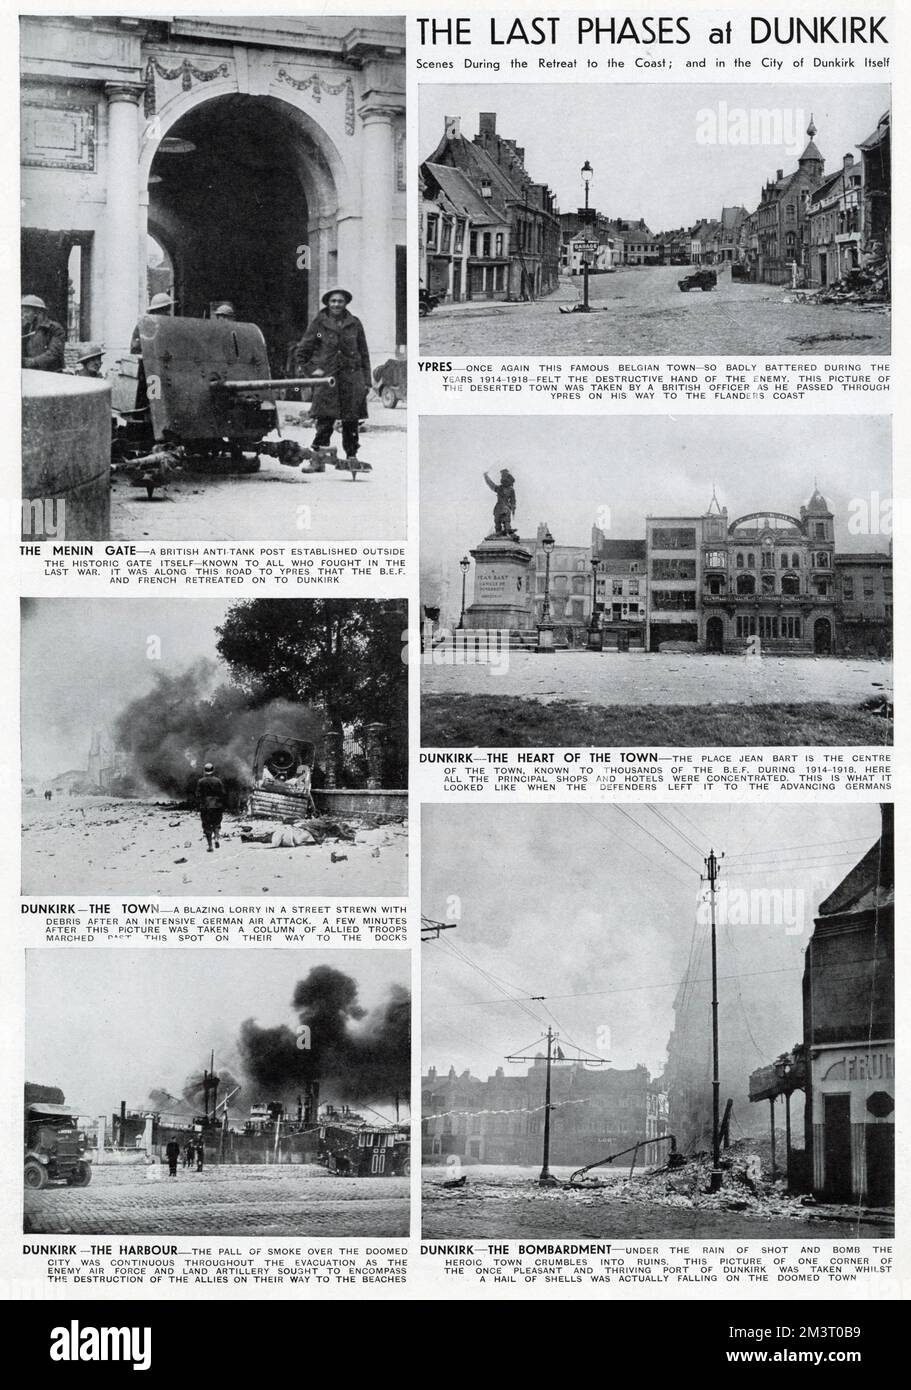 Scene from the final phases of the evacuation of Dunkirk, northern France, showing a British anti-tank post at the Menin Gate, a burning lorry with billowing black smoke in a Dunkirk street after an intensive German air attack, black smoke in Dunkirk harbour, a deserted street in Ypres, the empty Place Jean Bart in the centre of Dunkirk, and a Dunkirk street with smoke and rubble after enemy bombardment.     Date: 1940 Stock Photo